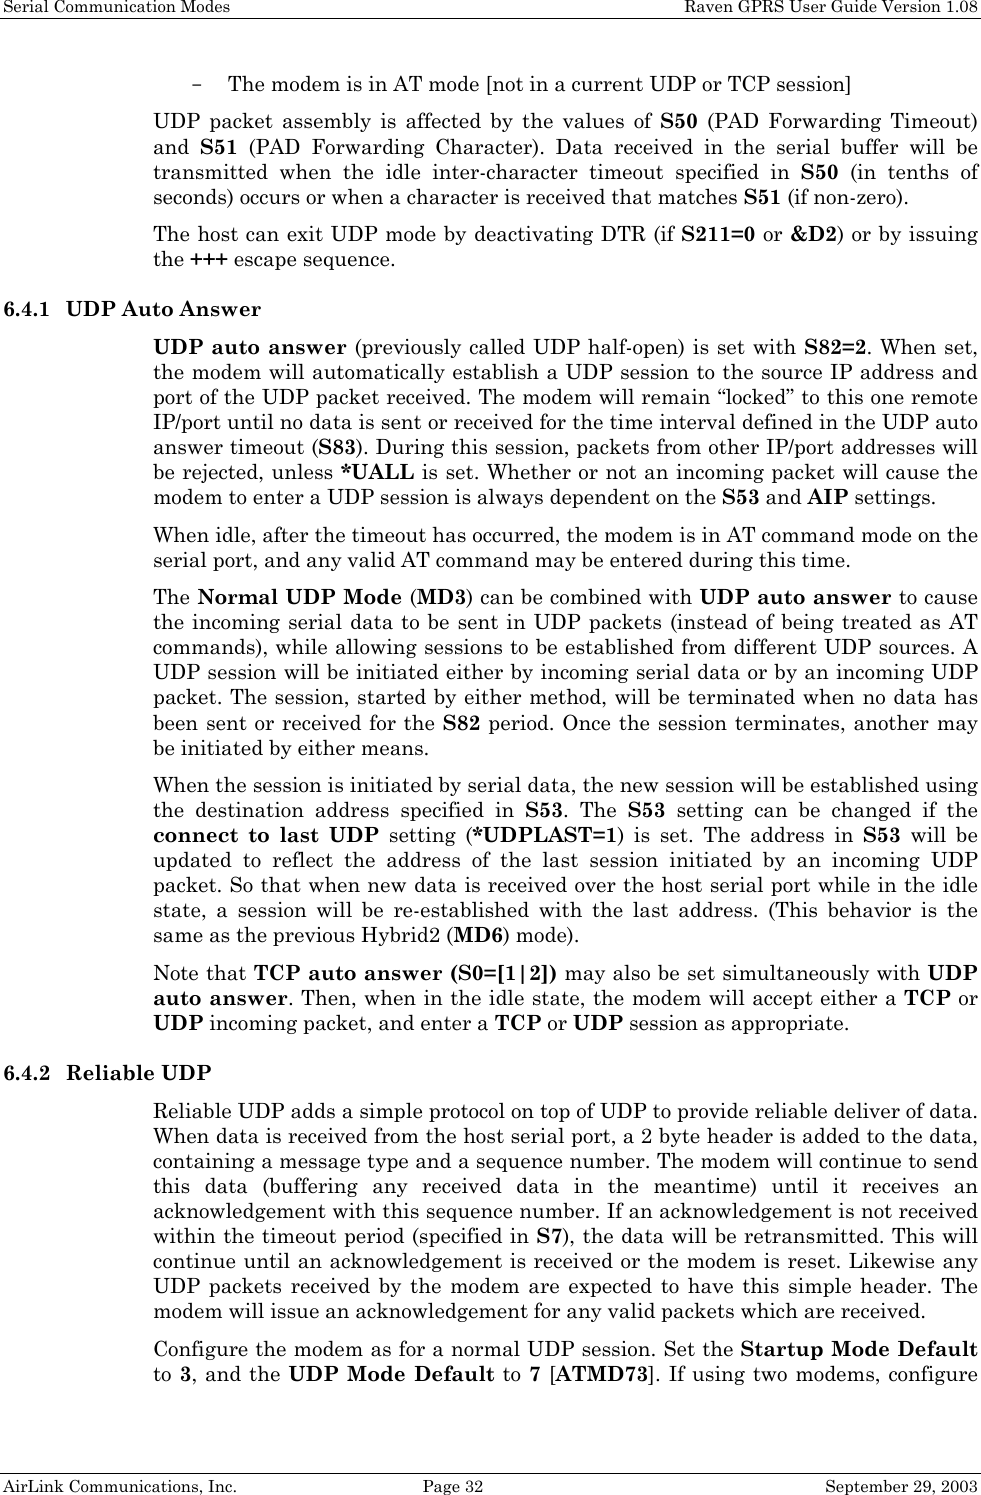 Serial Communication Modes    Raven GPRS User Guide Version 1.08 AirLink Communications, Inc.  Page 32  September 29, 2003 - The modem is in AT mode [not in a current UDP or TCP session] UDP packet assembly is affected by the values of S50 (PAD Forwarding Timeout) and  S51 (PAD Forwarding Character). Data received in the serial buffer will be transmitted when the idle inter-character timeout specified in S50 (in tenths of seconds) occurs or when a character is received that matches S51 (if non-zero). The host can exit UDP mode by deactivating DTR (if S211=0 or &amp;D2) or by issuing the +++ escape sequence. 6.4.1 UDP Auto Answer UDP auto answer (previously called UDP half-open) is set with S82=2. When set, the modem will automatically establish a UDP session to the source IP address and port of the UDP packet received. The modem will remain “locked” to this one remote IP/port until no data is sent or received for the time interval defined in the UDP auto answer timeout (S83). During this session, packets from other IP/port addresses will be rejected, unless *UALL is set. Whether or not an incoming packet will cause the modem to enter a UDP session is always dependent on the S53 and AIP settings. When idle, after the timeout has occurred, the modem is in AT command mode on the serial port, and any valid AT command may be entered during this time. The Normal UDP Mode (MD3) can be combined with UDP auto answer to cause the incoming serial data to be sent in UDP packets (instead of being treated as AT commands), while allowing sessions to be established from different UDP sources. A UDP session will be initiated either by incoming serial data or by an incoming UDP packet. The session, started by either method, will be terminated when no data has been sent or received for the S82 period. Once the session terminates, another may be initiated by either means. When the session is initiated by serial data, the new session will be established using the destination address specified in S53. The S53 setting can be changed if the connect to last UDP setting (*UDPLAST=1) is set. The address in S53 will be updated to reflect the address of the last session initiated by an incoming UDP packet. So that when new data is received over the host serial port while in the idle state, a session will be re-established with the last address. (This behavior is the same as the previous Hybrid2 (MD6) mode). Note that TCP auto answer (S0=[1|2]) may also be set simultaneously with UDP auto answer. Then, when in the idle state, the modem will accept either a TCP or UDP incoming packet, and enter a TCP or UDP session as appropriate. 6.4.2 Reliable UDP Reliable UDP adds a simple protocol on top of UDP to provide reliable deliver of data. When data is received from the host serial port, a 2 byte header is added to the data, containing a message type and a sequence number. The modem will continue to send this data (buffering any received data in the meantime) until it receives an acknowledgement with this sequence number. If an acknowledgement is not received within the timeout period (specified in S7), the data will be retransmitted. This will continue until an acknowledgement is received or the modem is reset. Likewise any UDP packets received by the modem are expected to have this simple header. The modem will issue an acknowledgement for any valid packets which are received.  Configure the modem as for a normal UDP session. Set the Startup Mode Default to 3, and the UDP Mode Default to 7 [ATMD73]. If using two modems, configure 